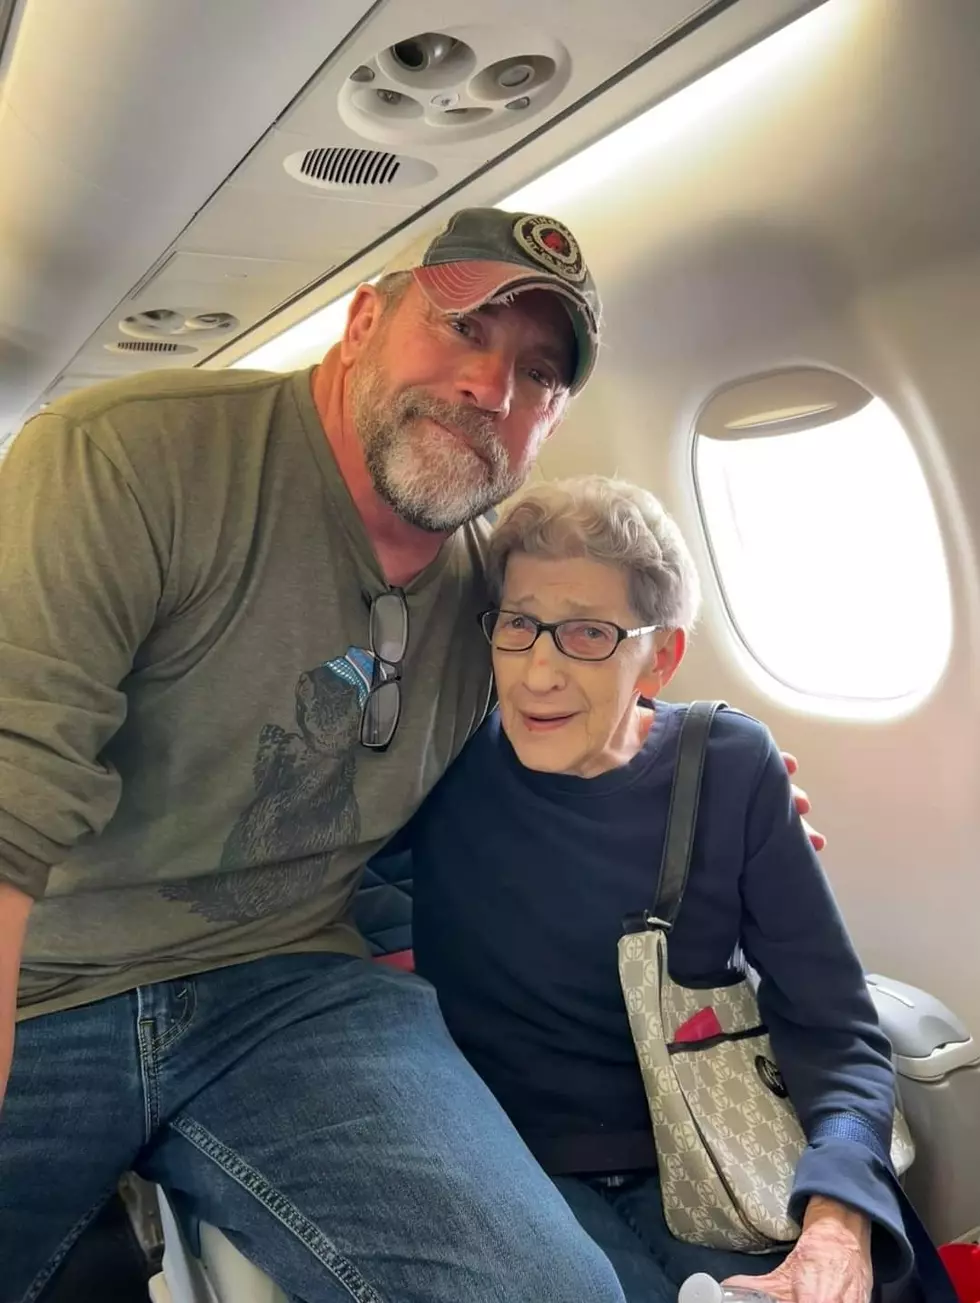 Passenger In First Class Performs Unexpected Act of Kindness